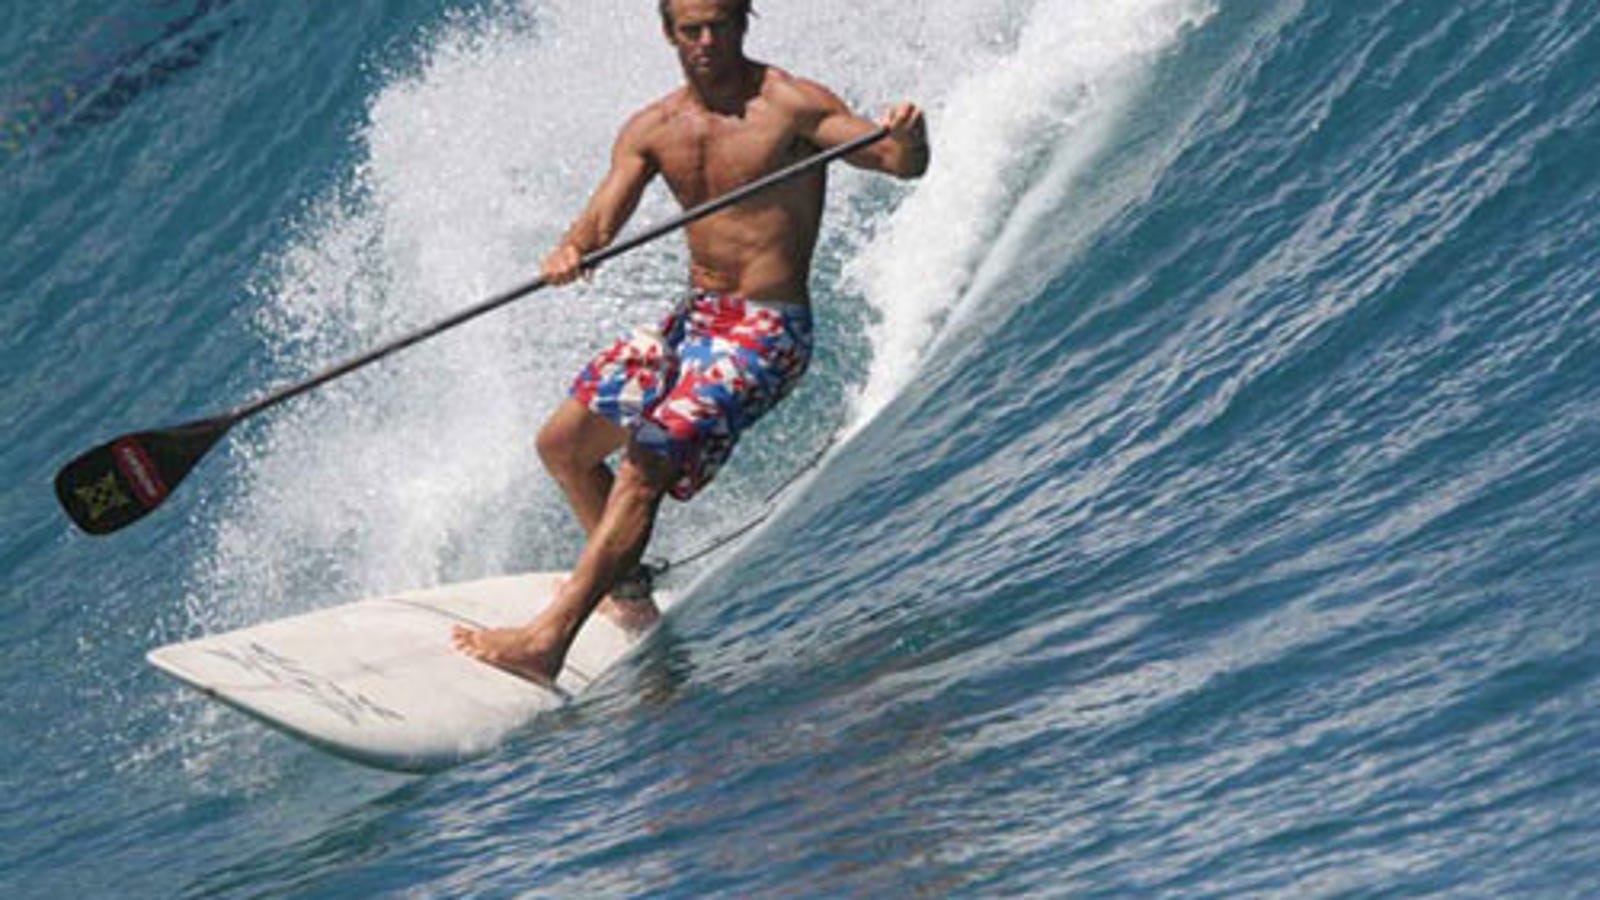 Laird Hamilton Science And The Surf Board